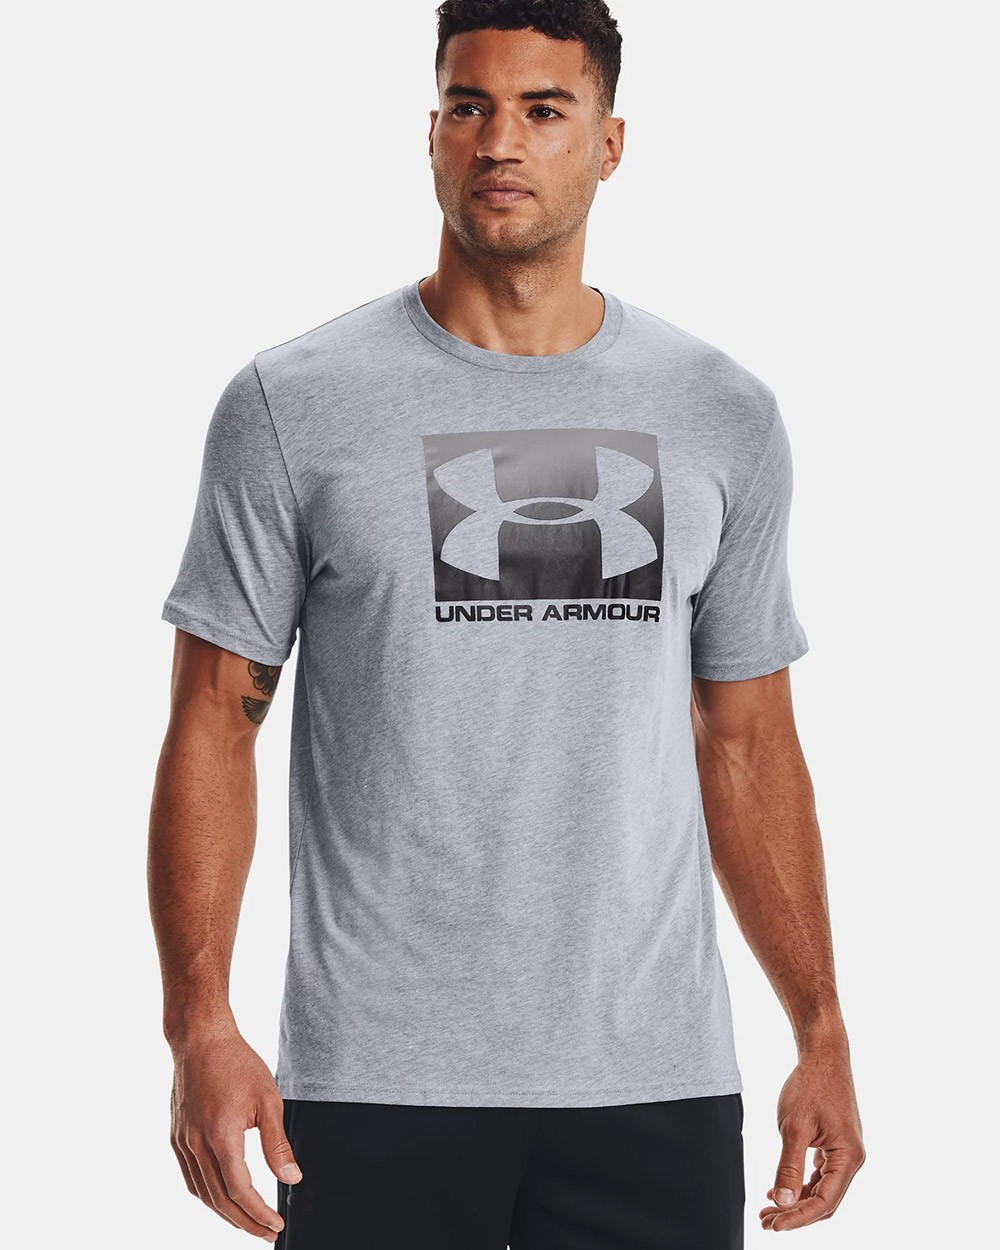 Boxed T-Shirt UNDER ARMOR - Sportstyle